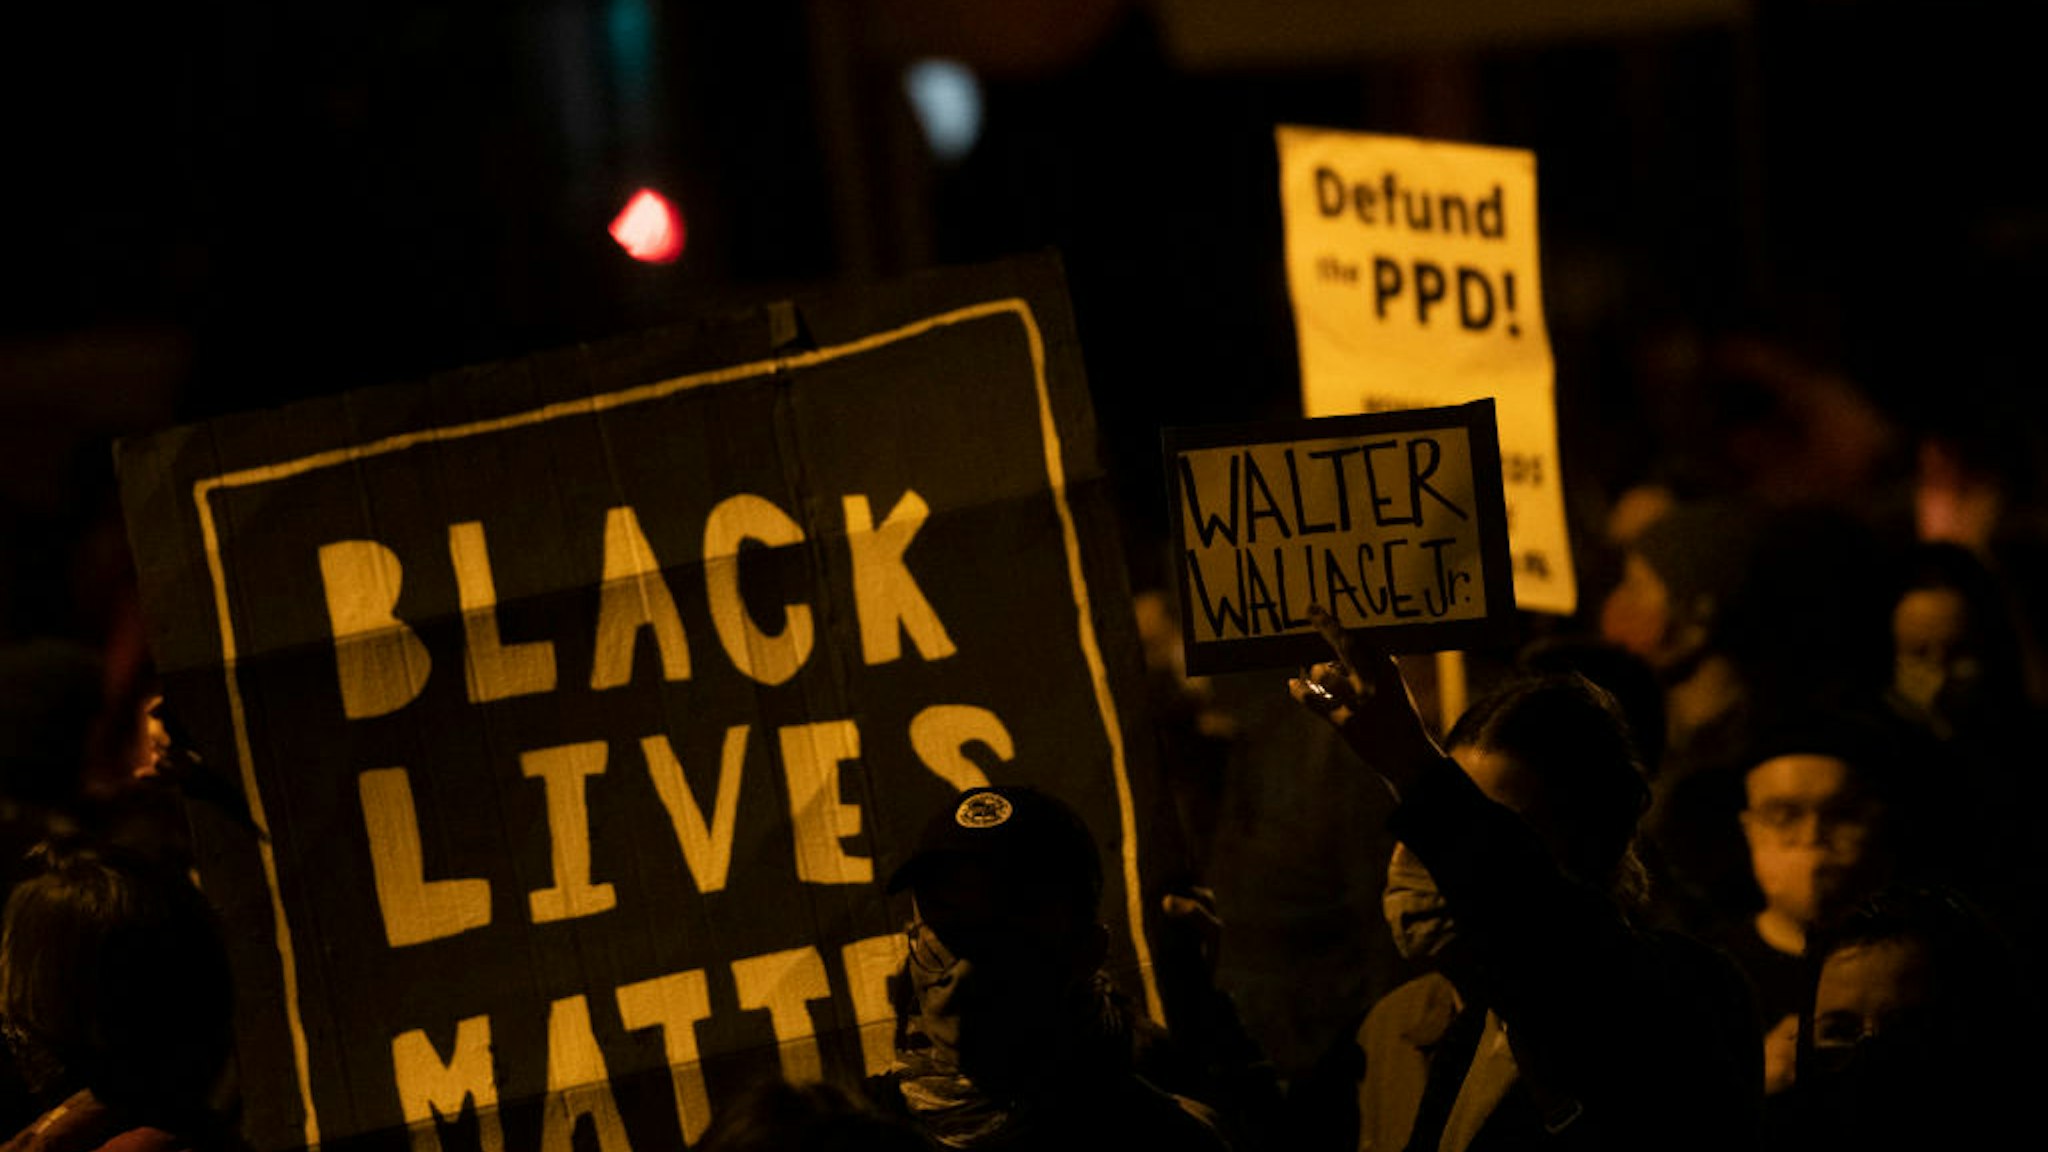 Demonstrators hold placards reading "BLACK LIVES MATTER," "Walter Wallace JR." and DEFUND PPD" as they gather in protest near the location where Walter Wallace, Jr. was killed by two police officers on October 27, 2020 in Philadelphia, Pennsylvania.